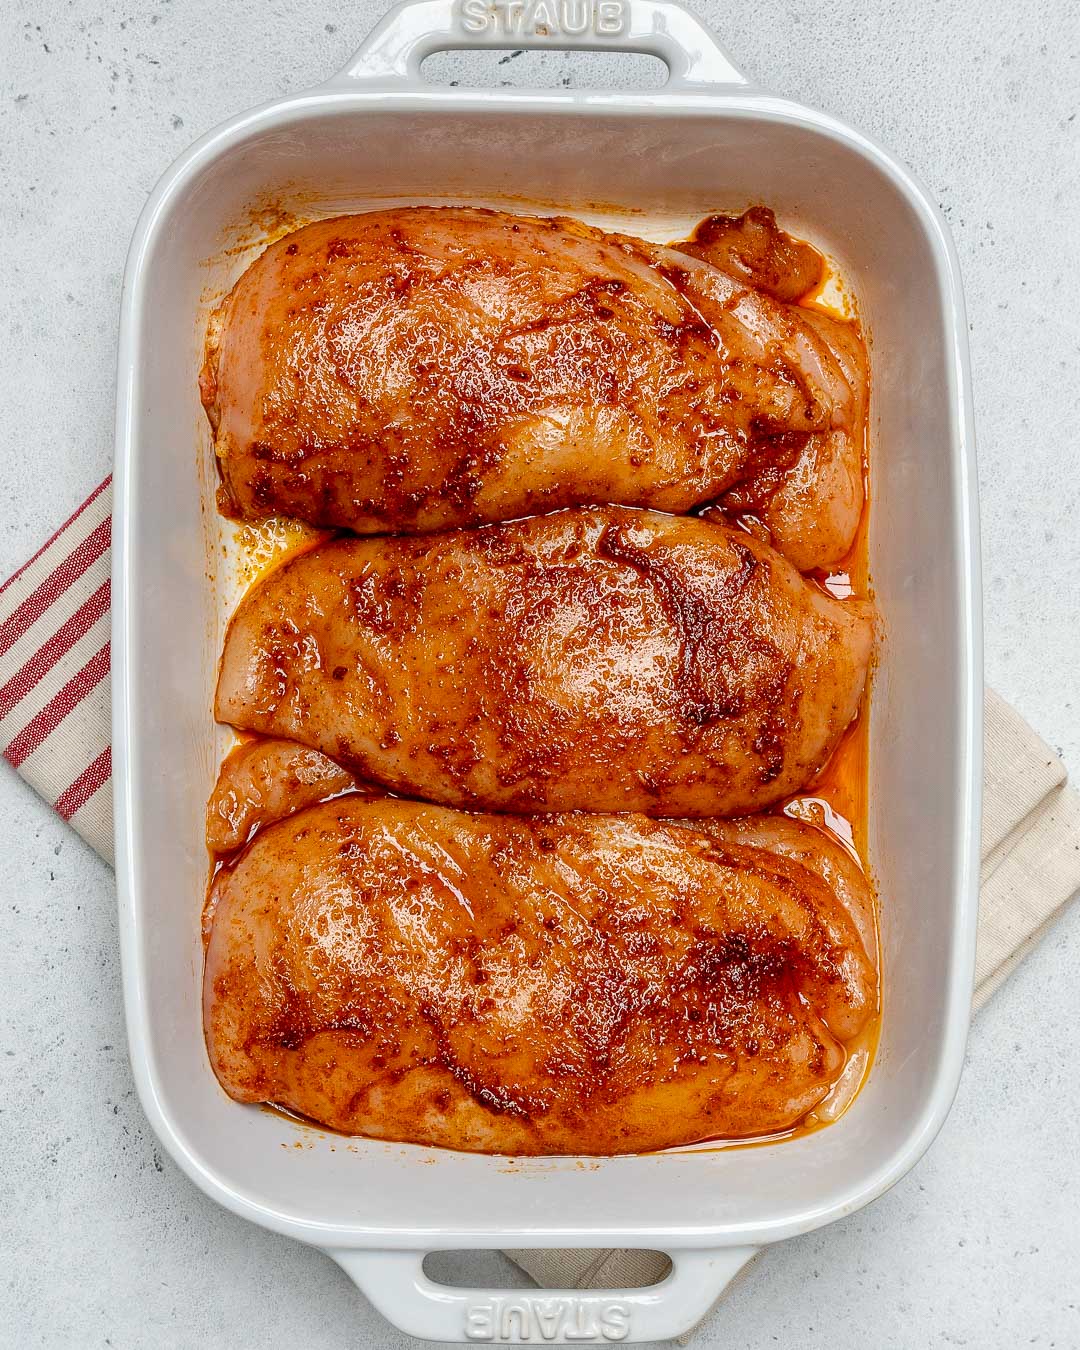 https://cleanfoodcrush.com/wp-content/uploads/2019/01/Juicy-Baked-Chicken-Breasts-Recipes-by-CFC.jpg